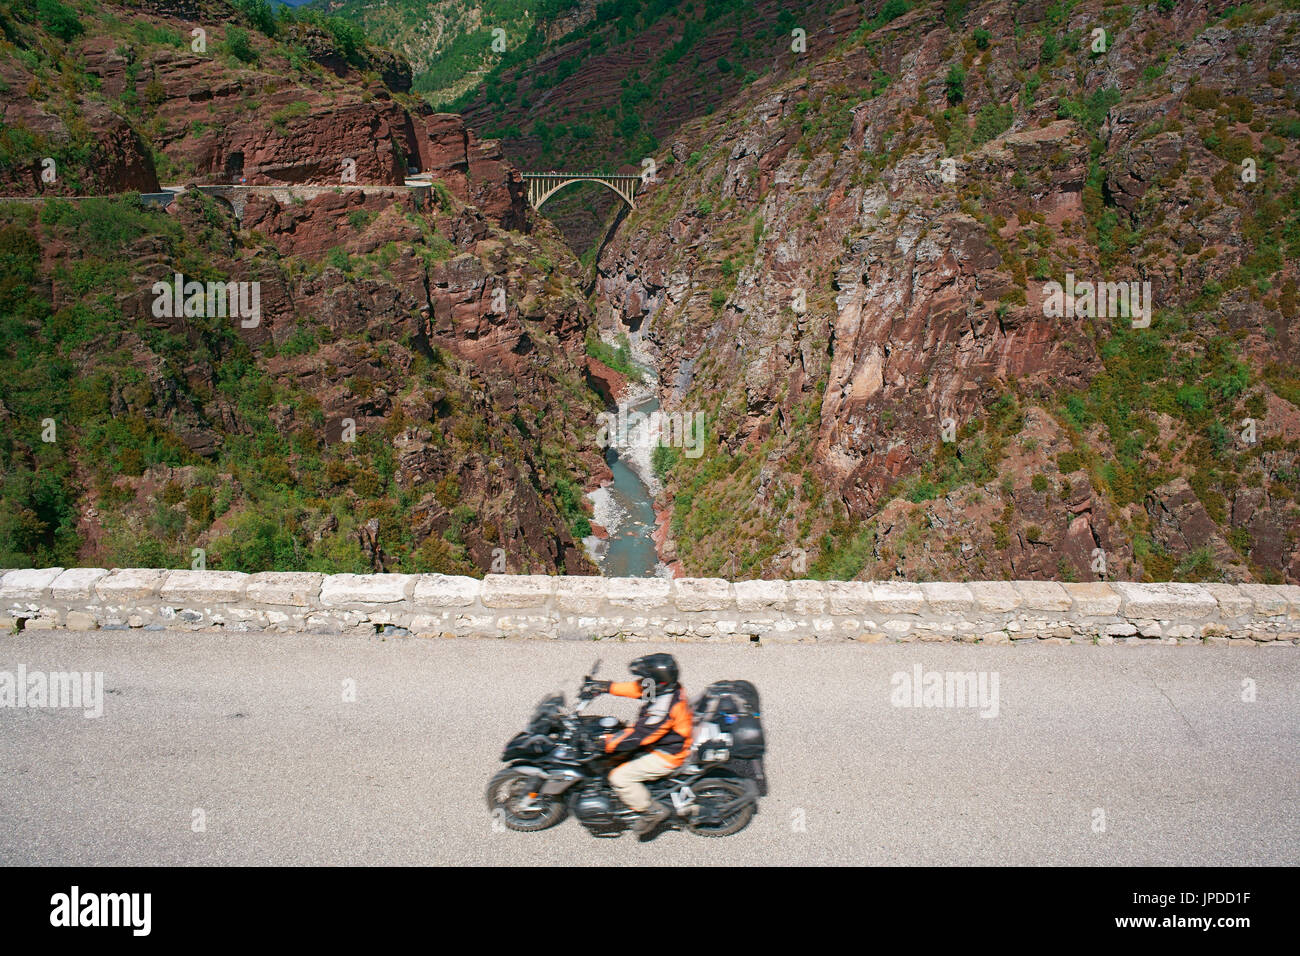 Motorcyclist (with motion blur) riding on a clifftop road above the Var River, Bridge of the Bride in the distance. Guillaumes, Daluis Gorge, France. Stock Photo